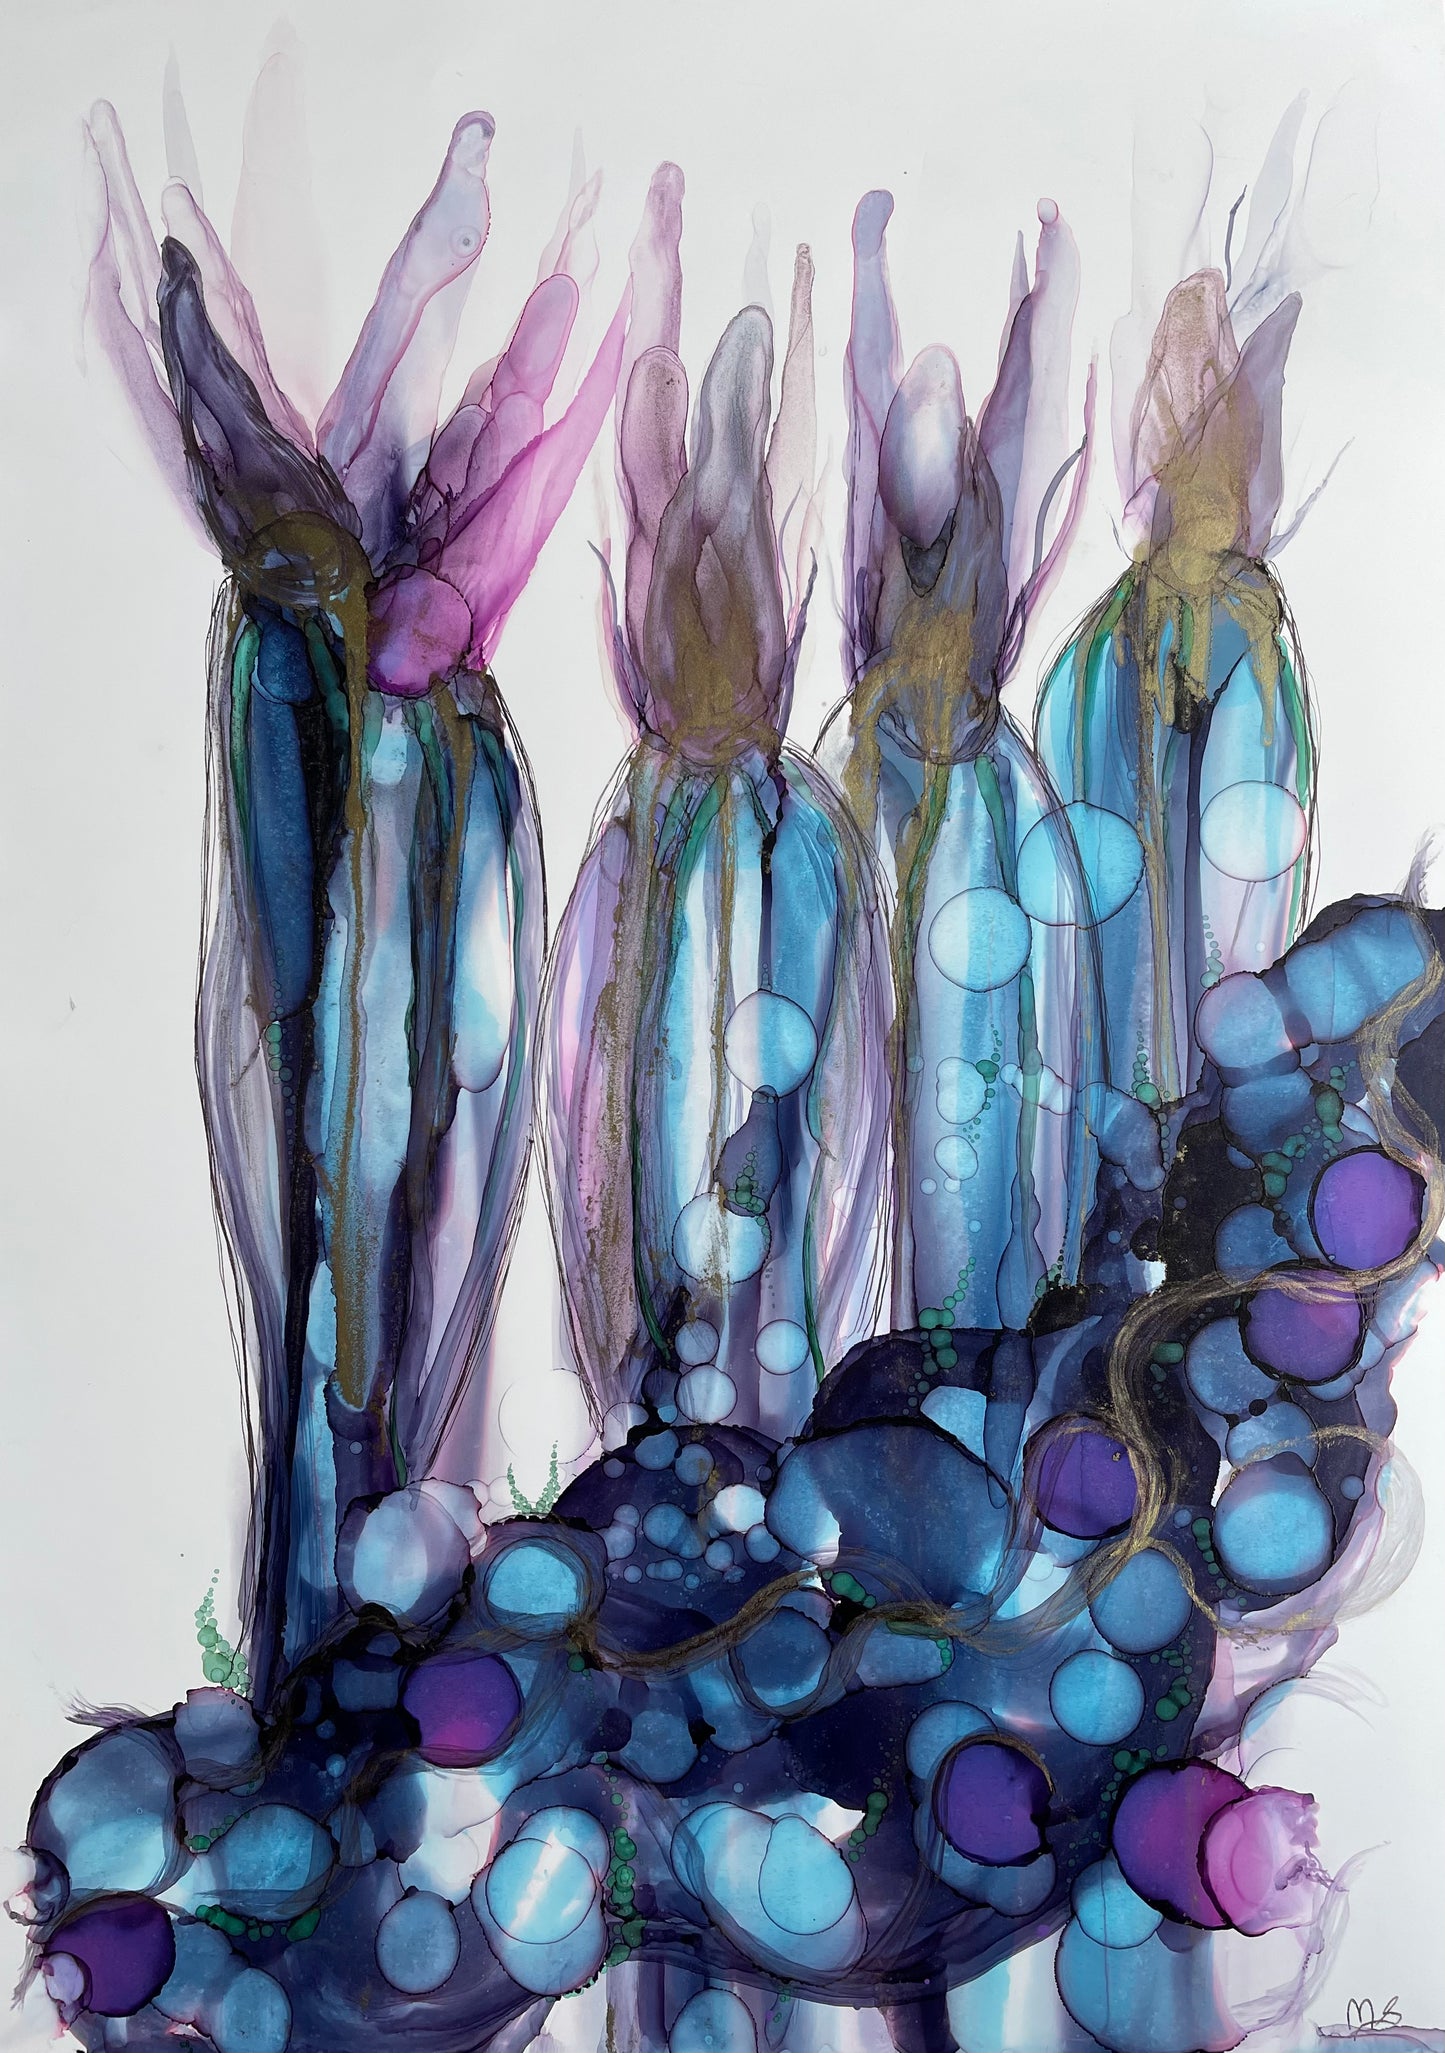 Night Blooming Cactus-Original abstract art with blue flowering cacti